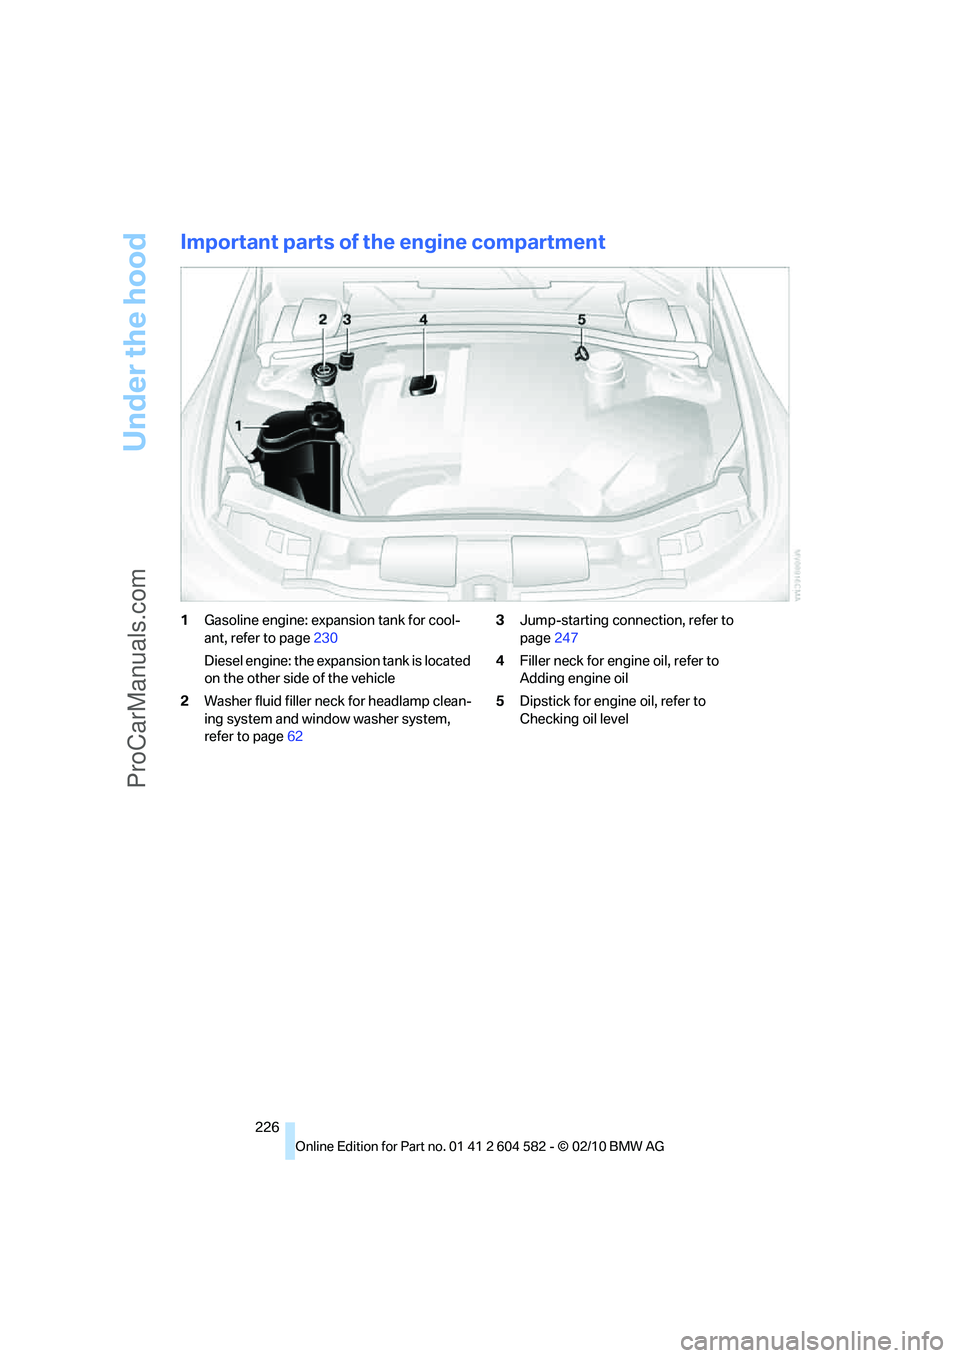 BMW 3 WAGON 2011  Owners Manual Under the hood
226
Important parts of the engine compartment
1Gasoline engine: expansion tank for cool-
ant, refer to page230
Diesel engine: the expansion tank is located 
on the other side of the veh